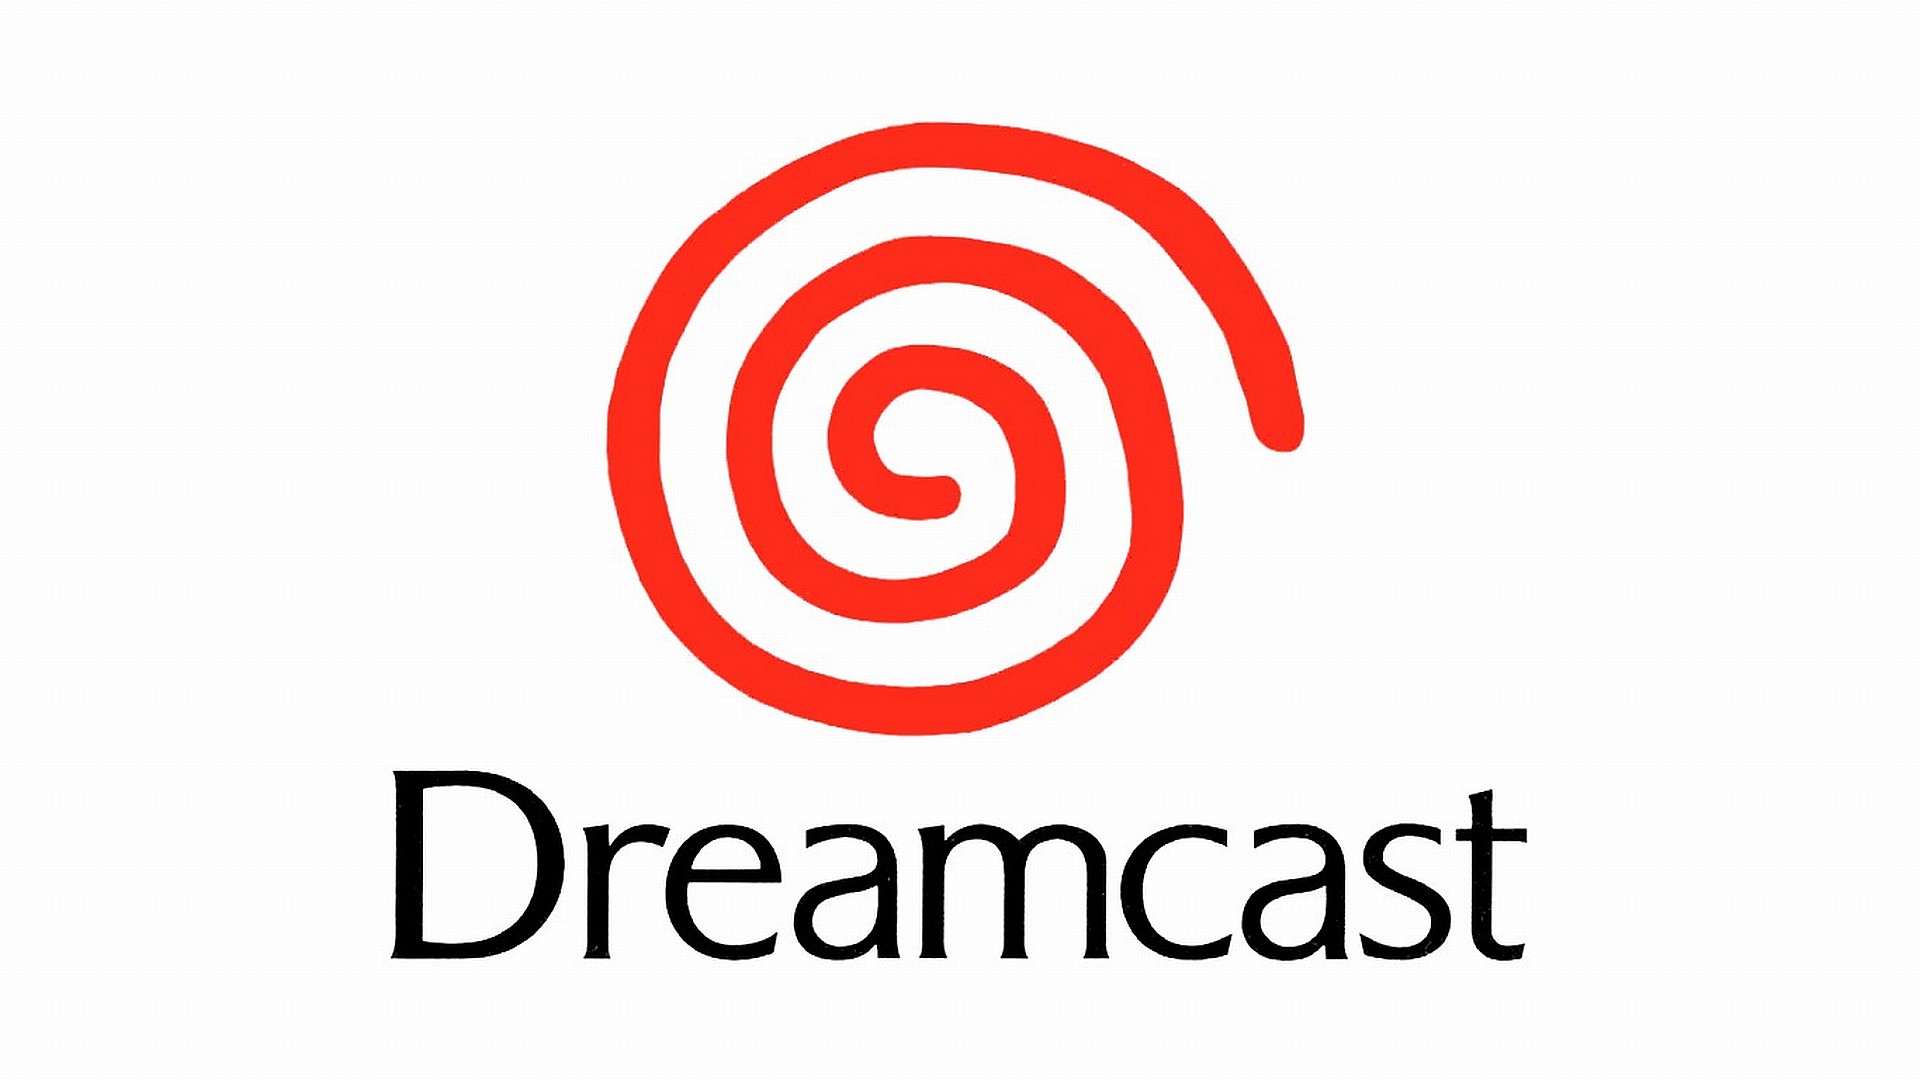 15 Reasons Dreamcast Rocked  -  Iconic Branding